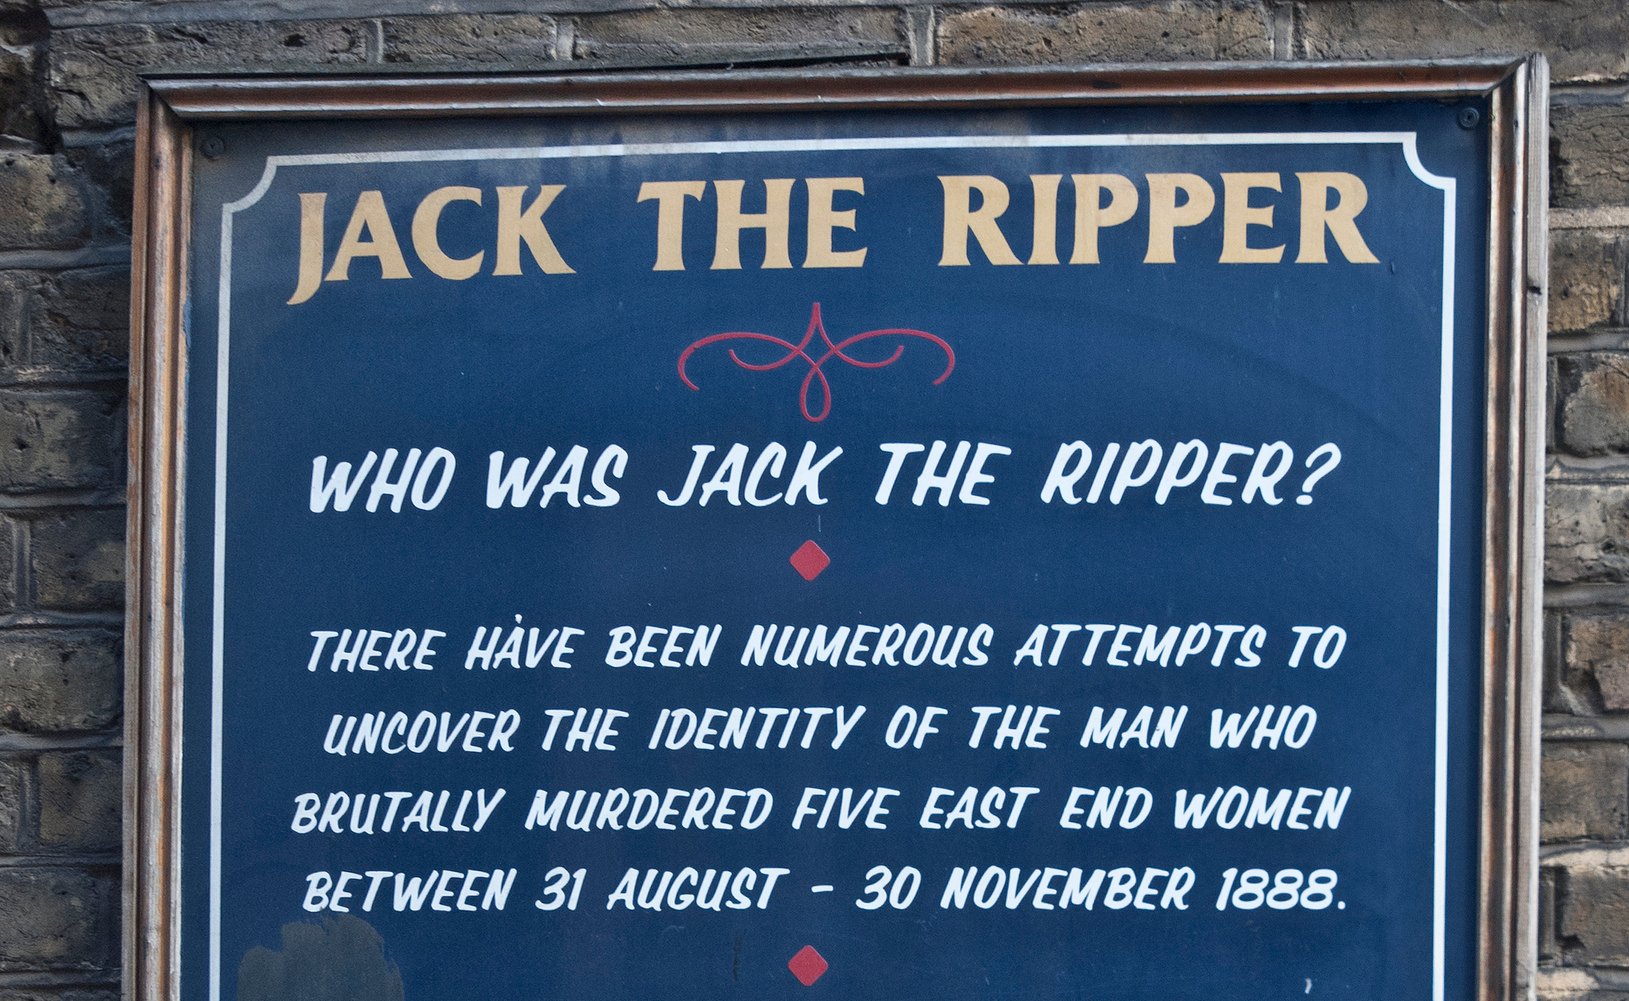 Jack the Ripper Identity Confirmed by Daily Mail Not Science | The Mary Sue